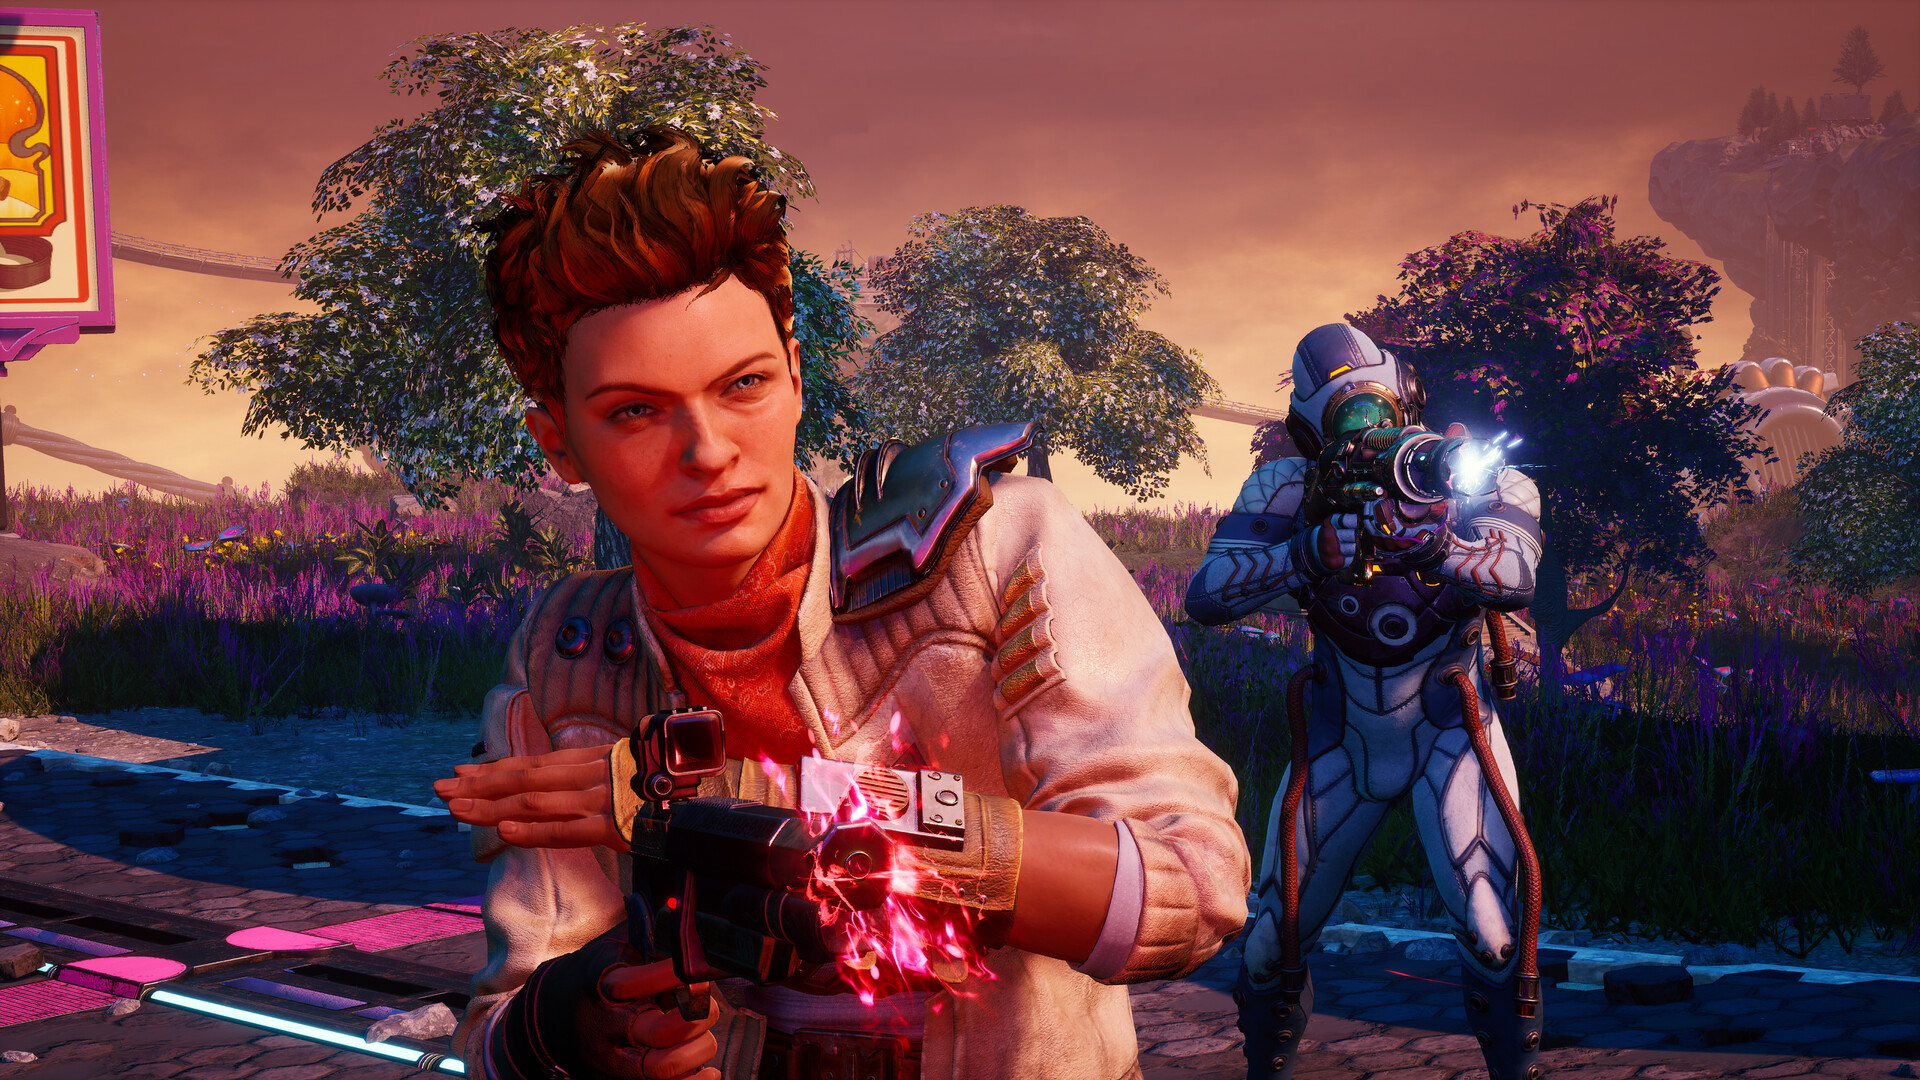 The Outer Worlds: Peril on Gorgon - PC - Compre na Nuuvem